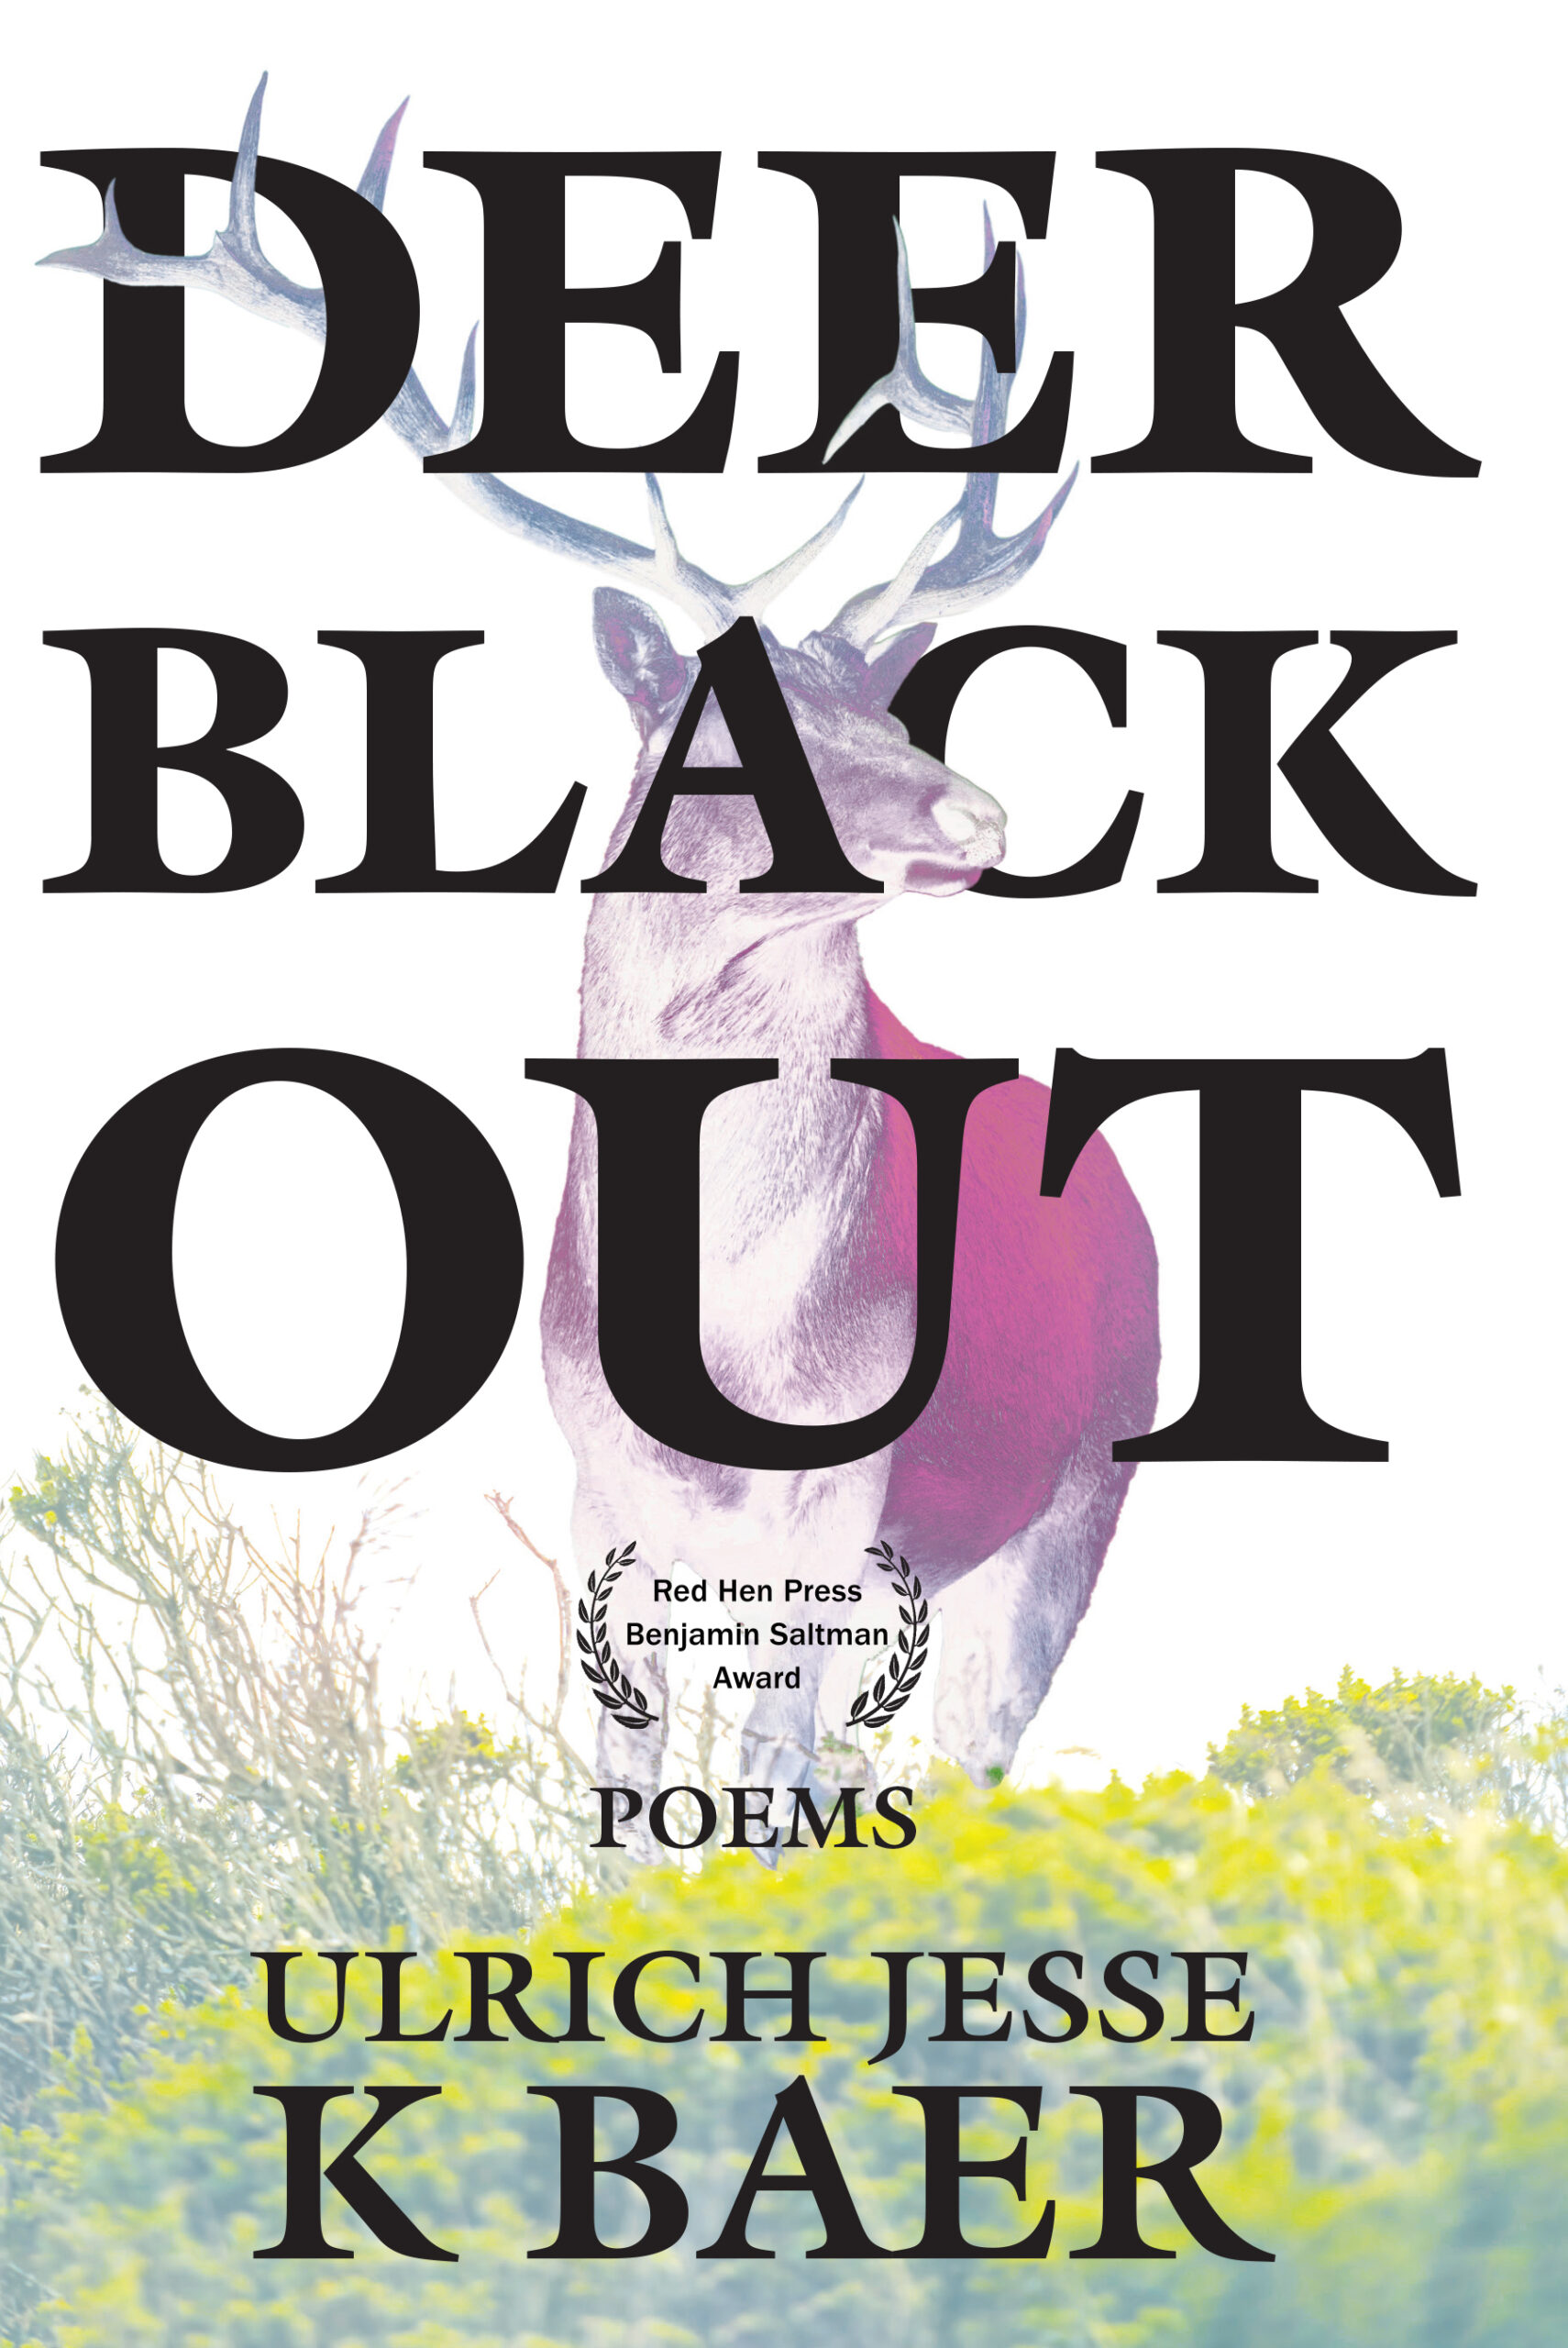 Black text: "Deer Black Out, Poems, Ulrich Jesse K Baer" take up most of the book cover image, superimposed and intertwined with a negative color image of a deer in grass. Black laurels also indicate "Red Hen Press Benjamin Saltman Award"